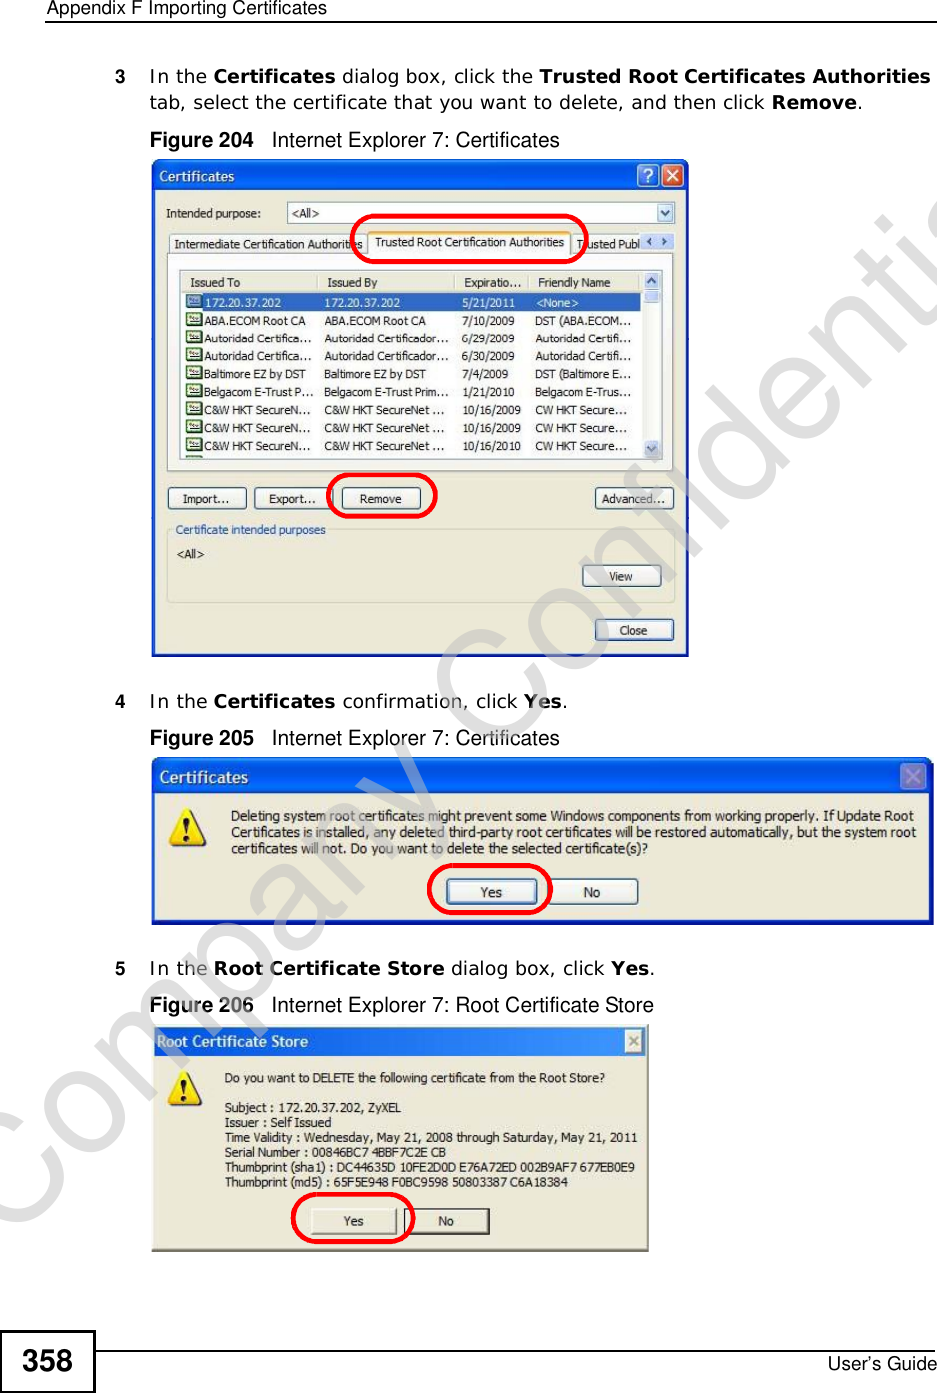 Appendix FImporting CertificatesUser’s Guide3583In the Certificates dialog box, click the Trusted Root Certificates Authoritiestab, select the certificate that you want to delete, and then click Remove.Figure 204   Internet Explorer 7: Certificates4In the Certificates confirmation, click Yes.Figure 205   Internet Explorer 7: Certificates5In the Root Certificate Store dialog box, click Yes.Figure 206   Internet Explorer 7: Root Certificate StoreCompany Confidential